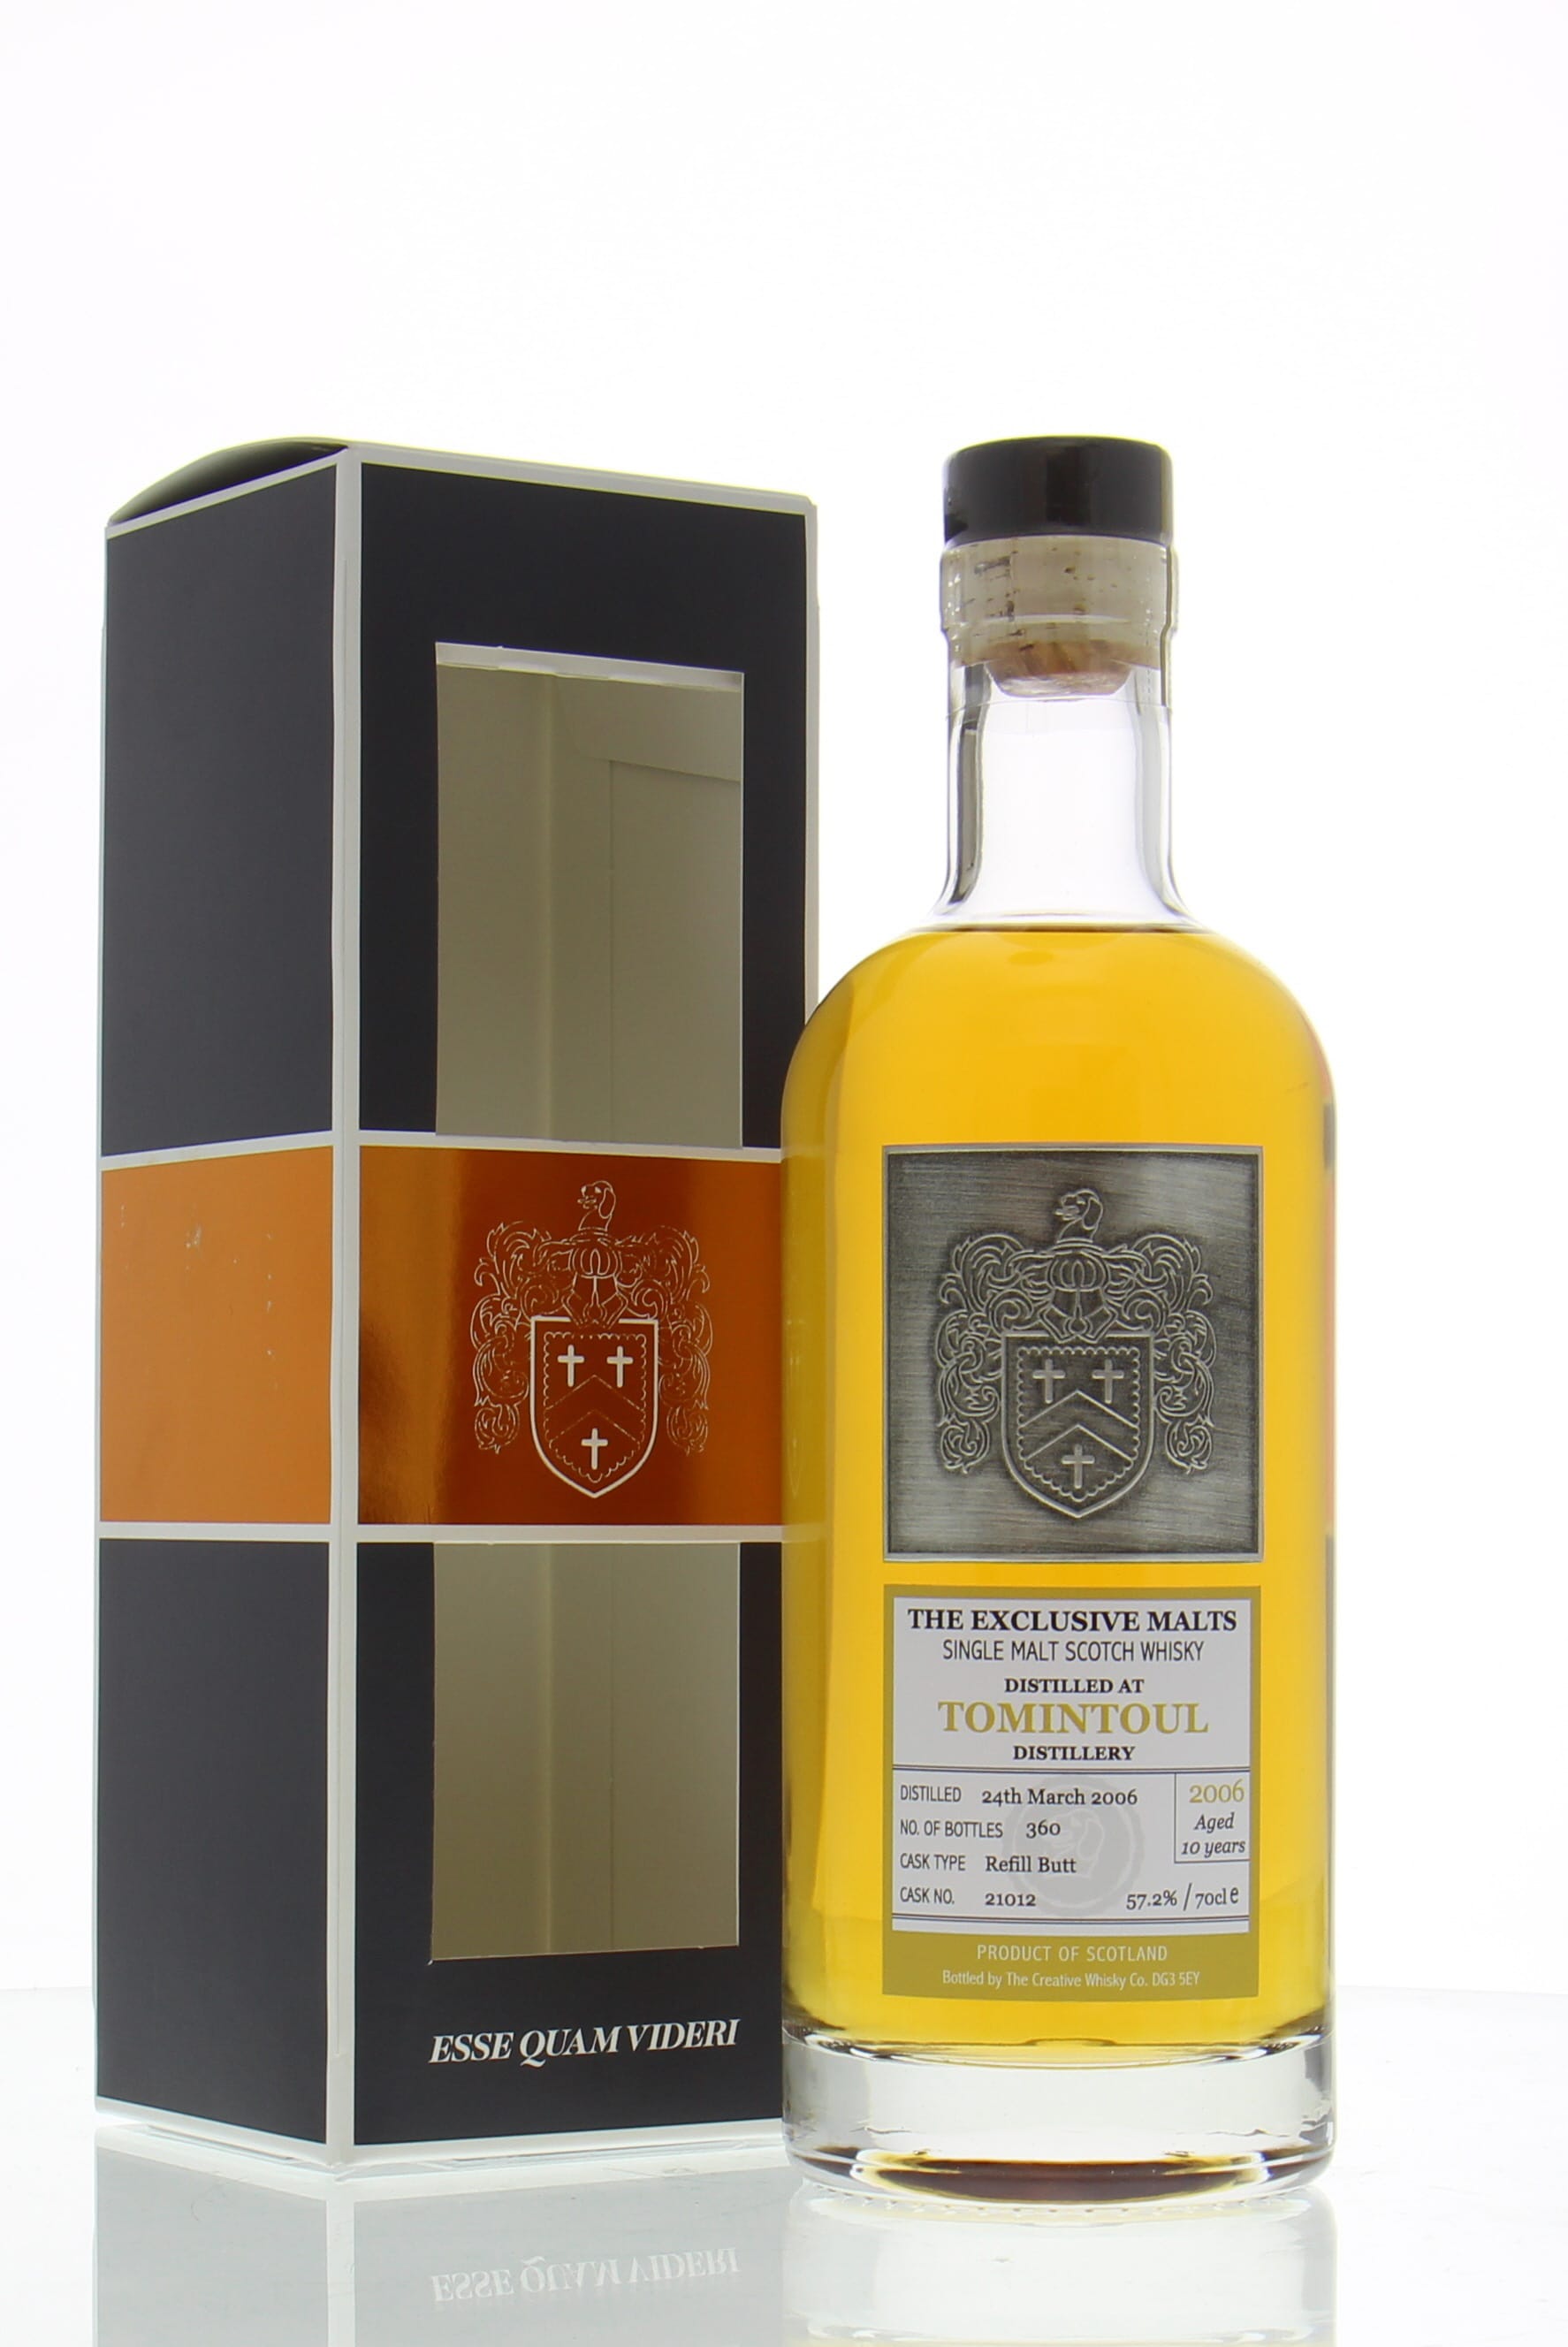 Tomintoul - 10 Years Old The Creative Whisky Company 57.2% 2006 In Original Container